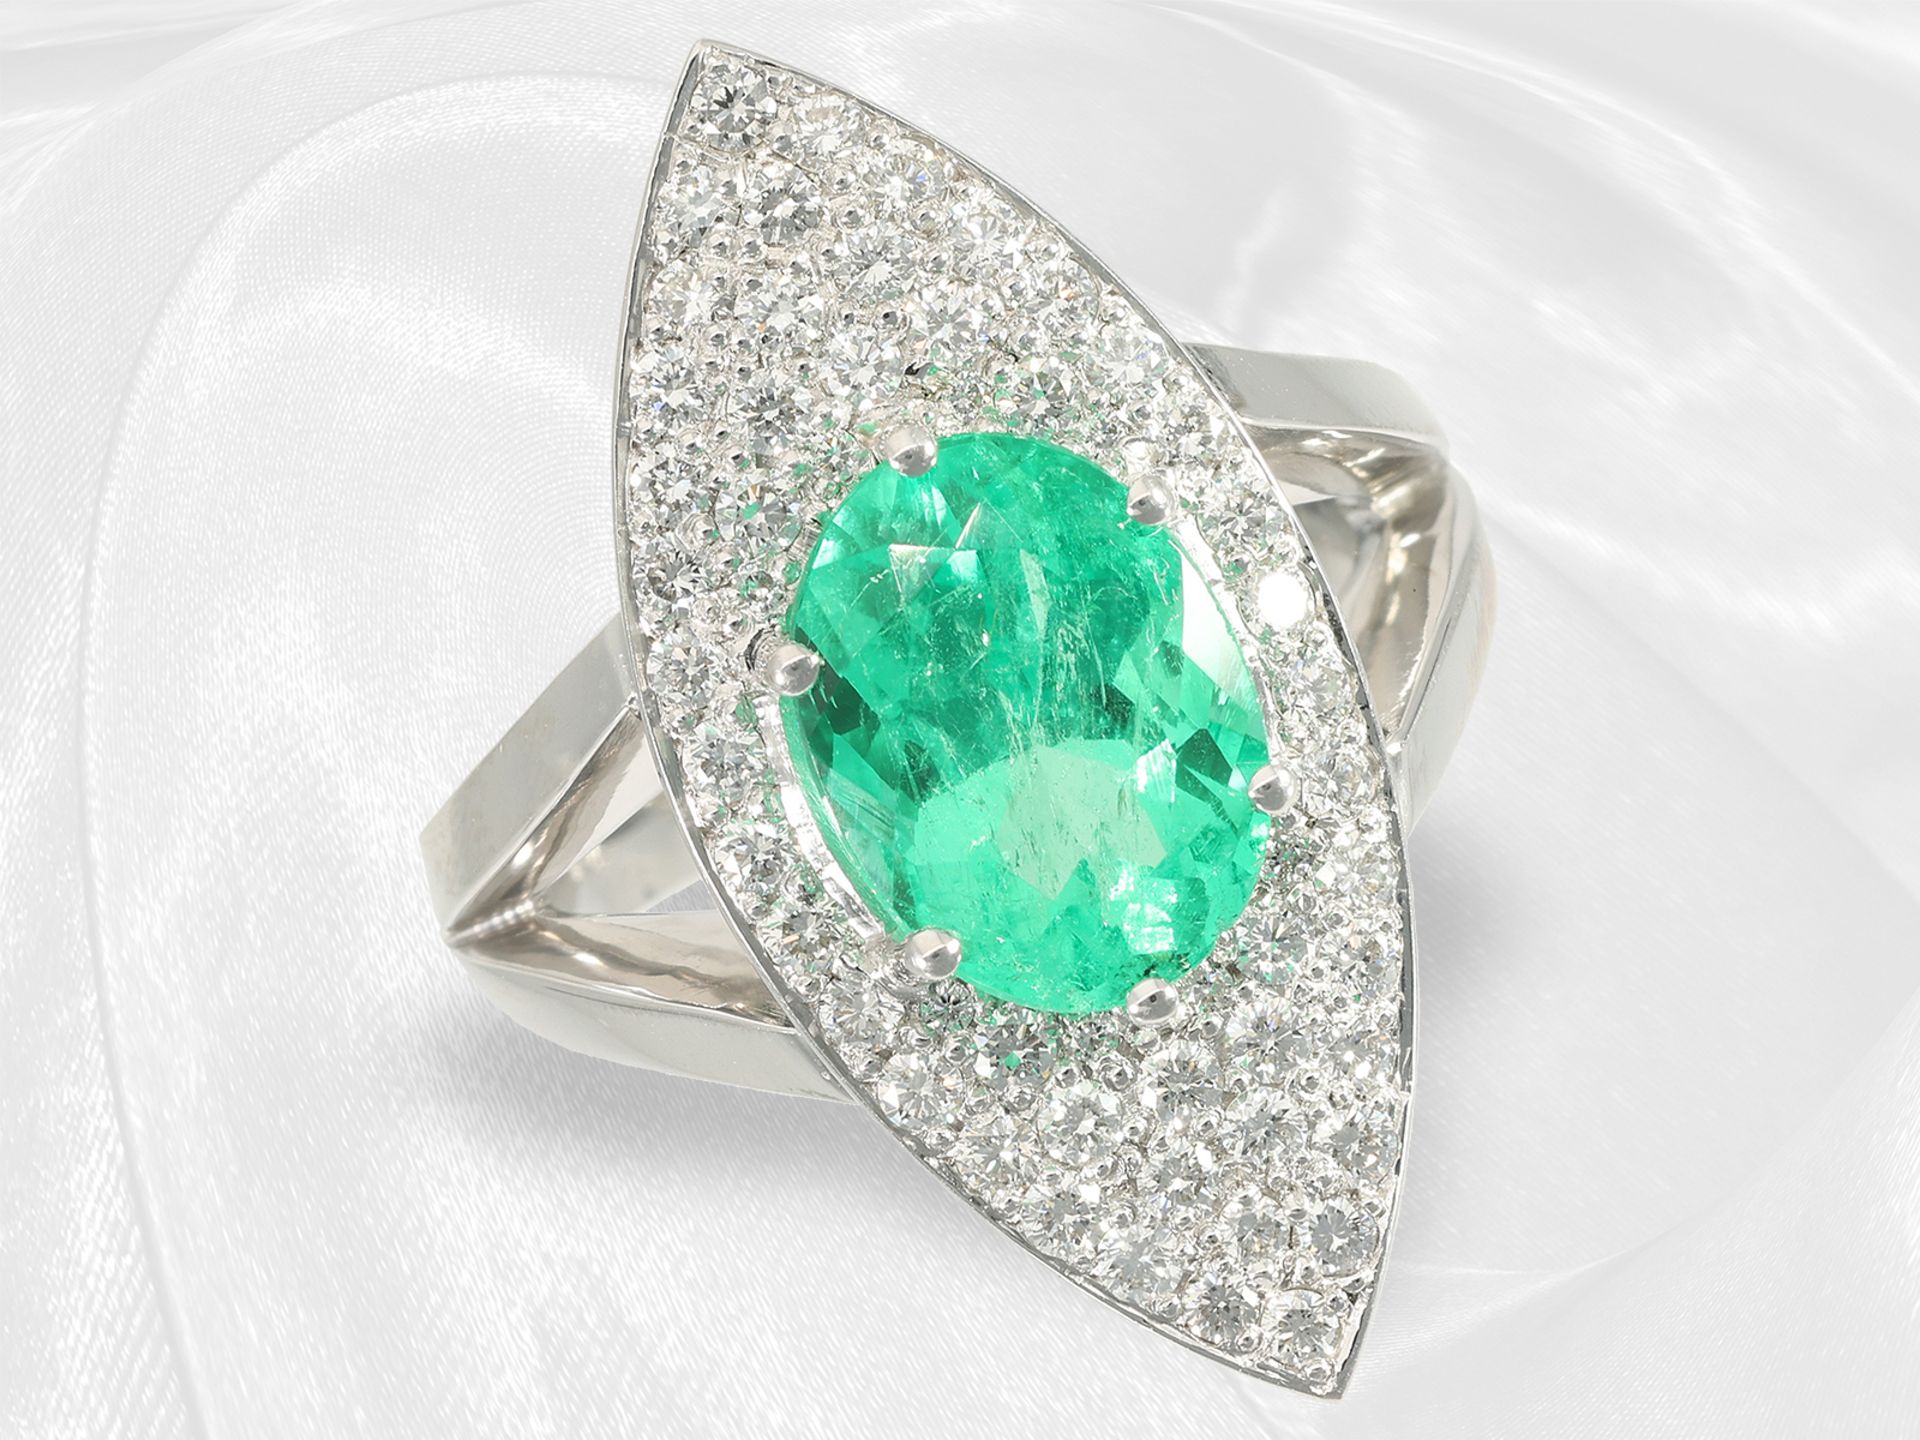 Formerly very expensive emerald/brilliant-cut diamond goldsmith ring with Colombian top quality emer